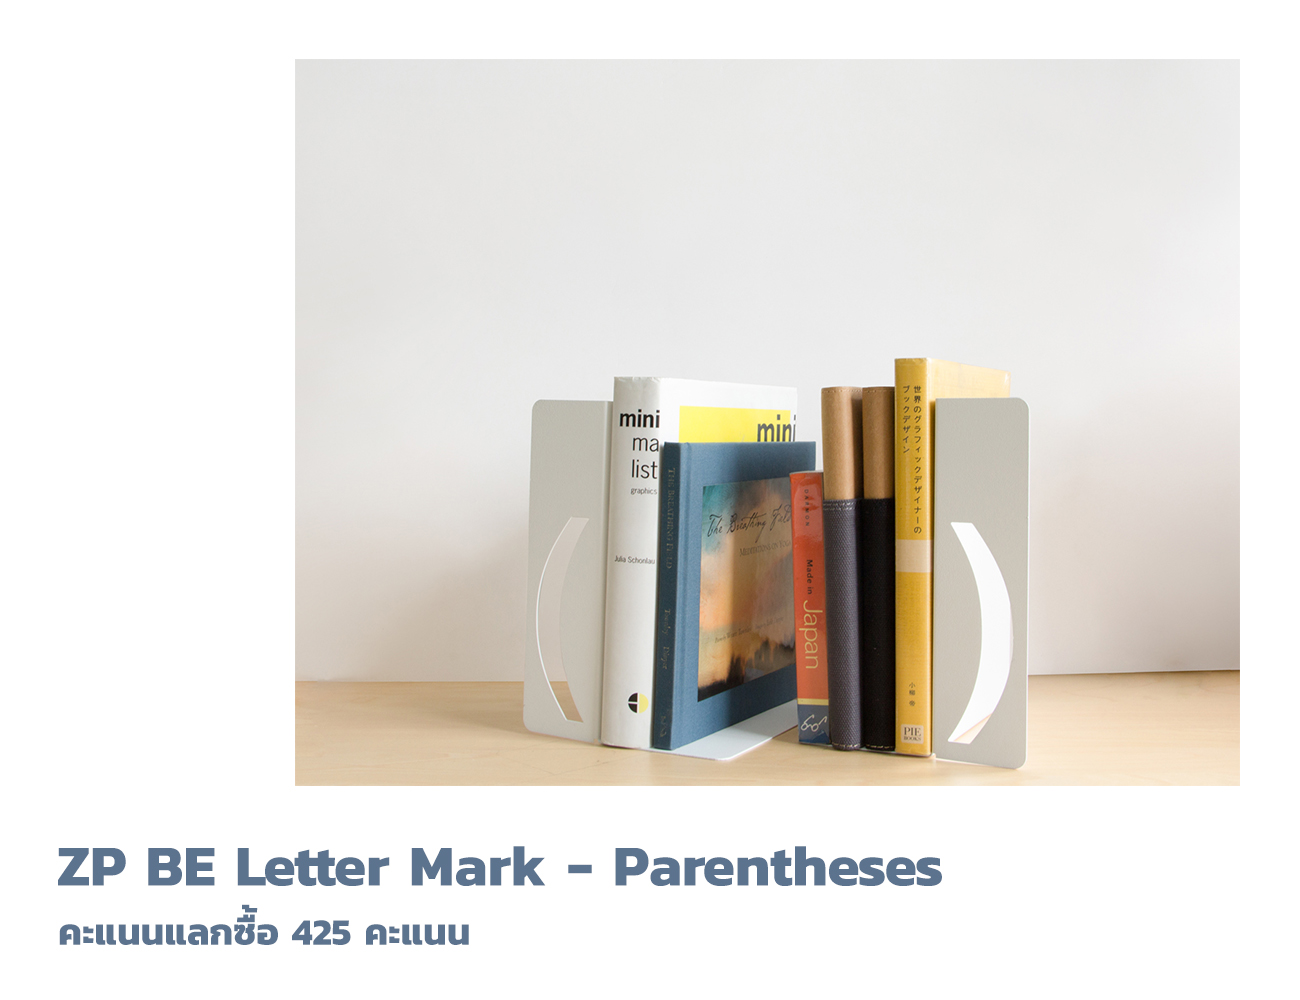 ZP BE Letter Mark - Parentheses